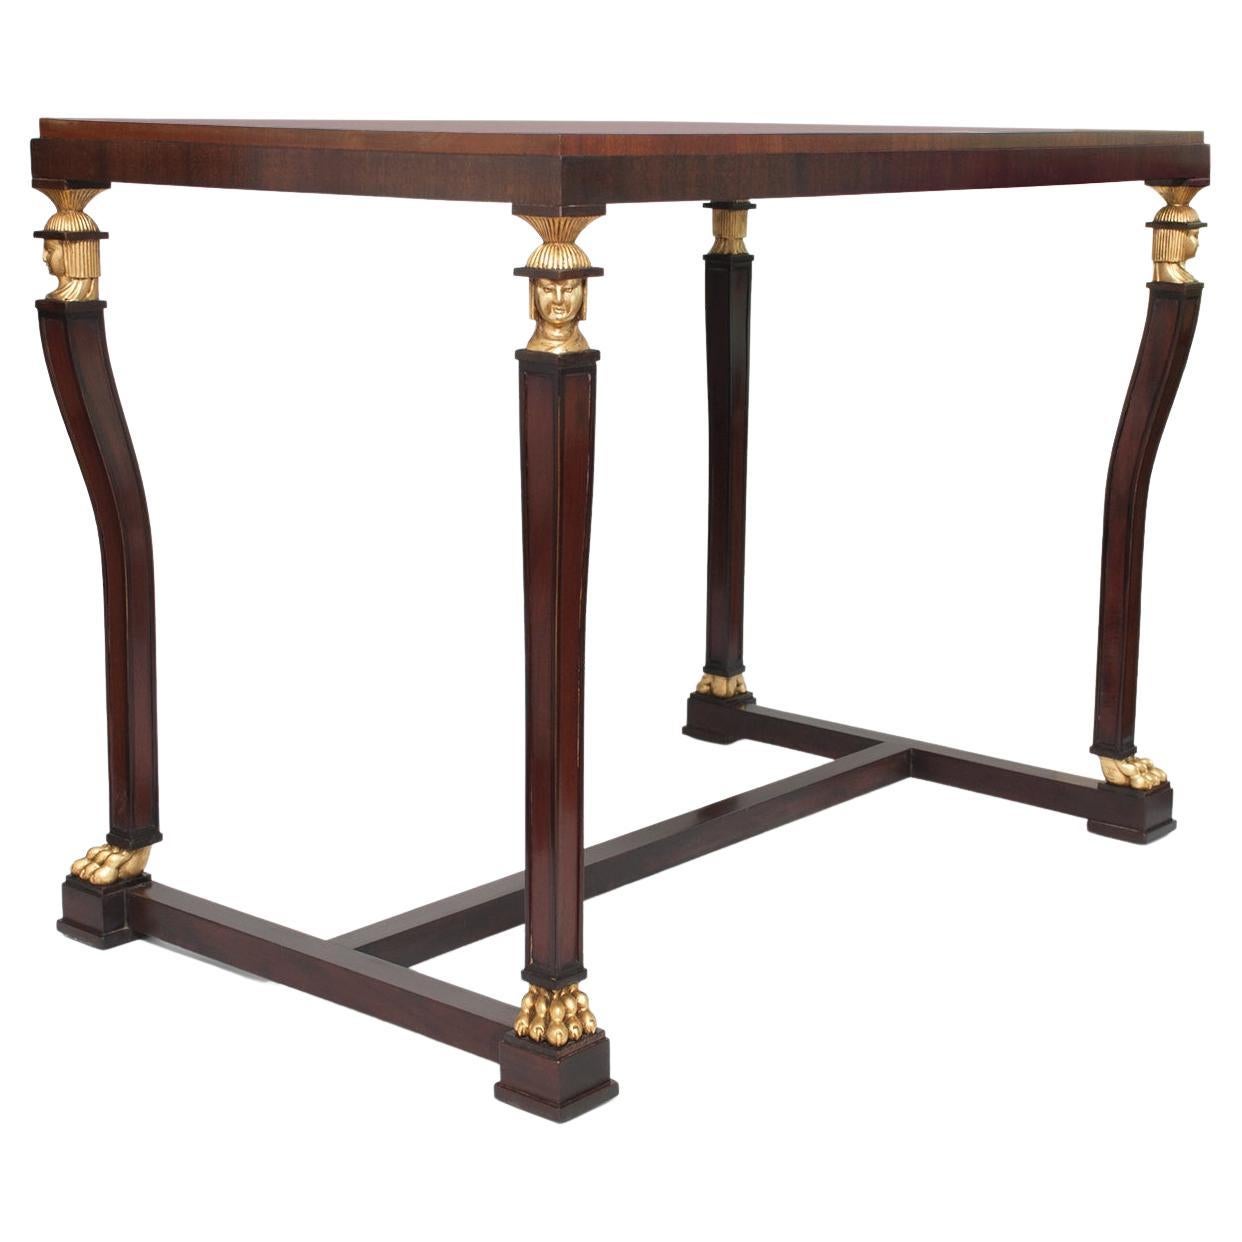 Axel Einar Hjorth Swedish Grace Mahogany Console Center Table for NK, Stockholm For Sale